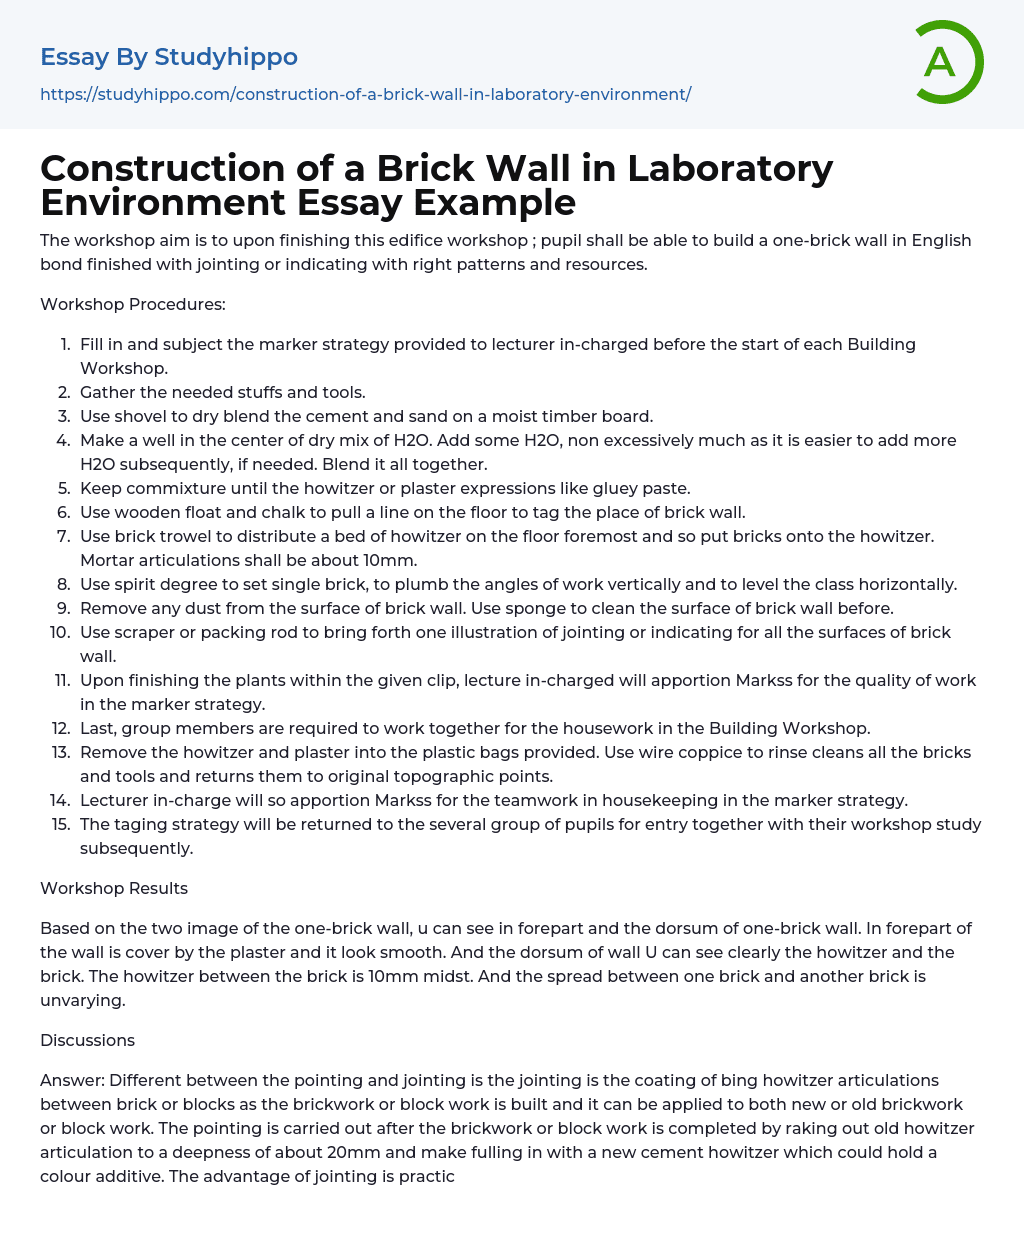 Construction of a Brick Wall in Laboratory Environment Essay Example